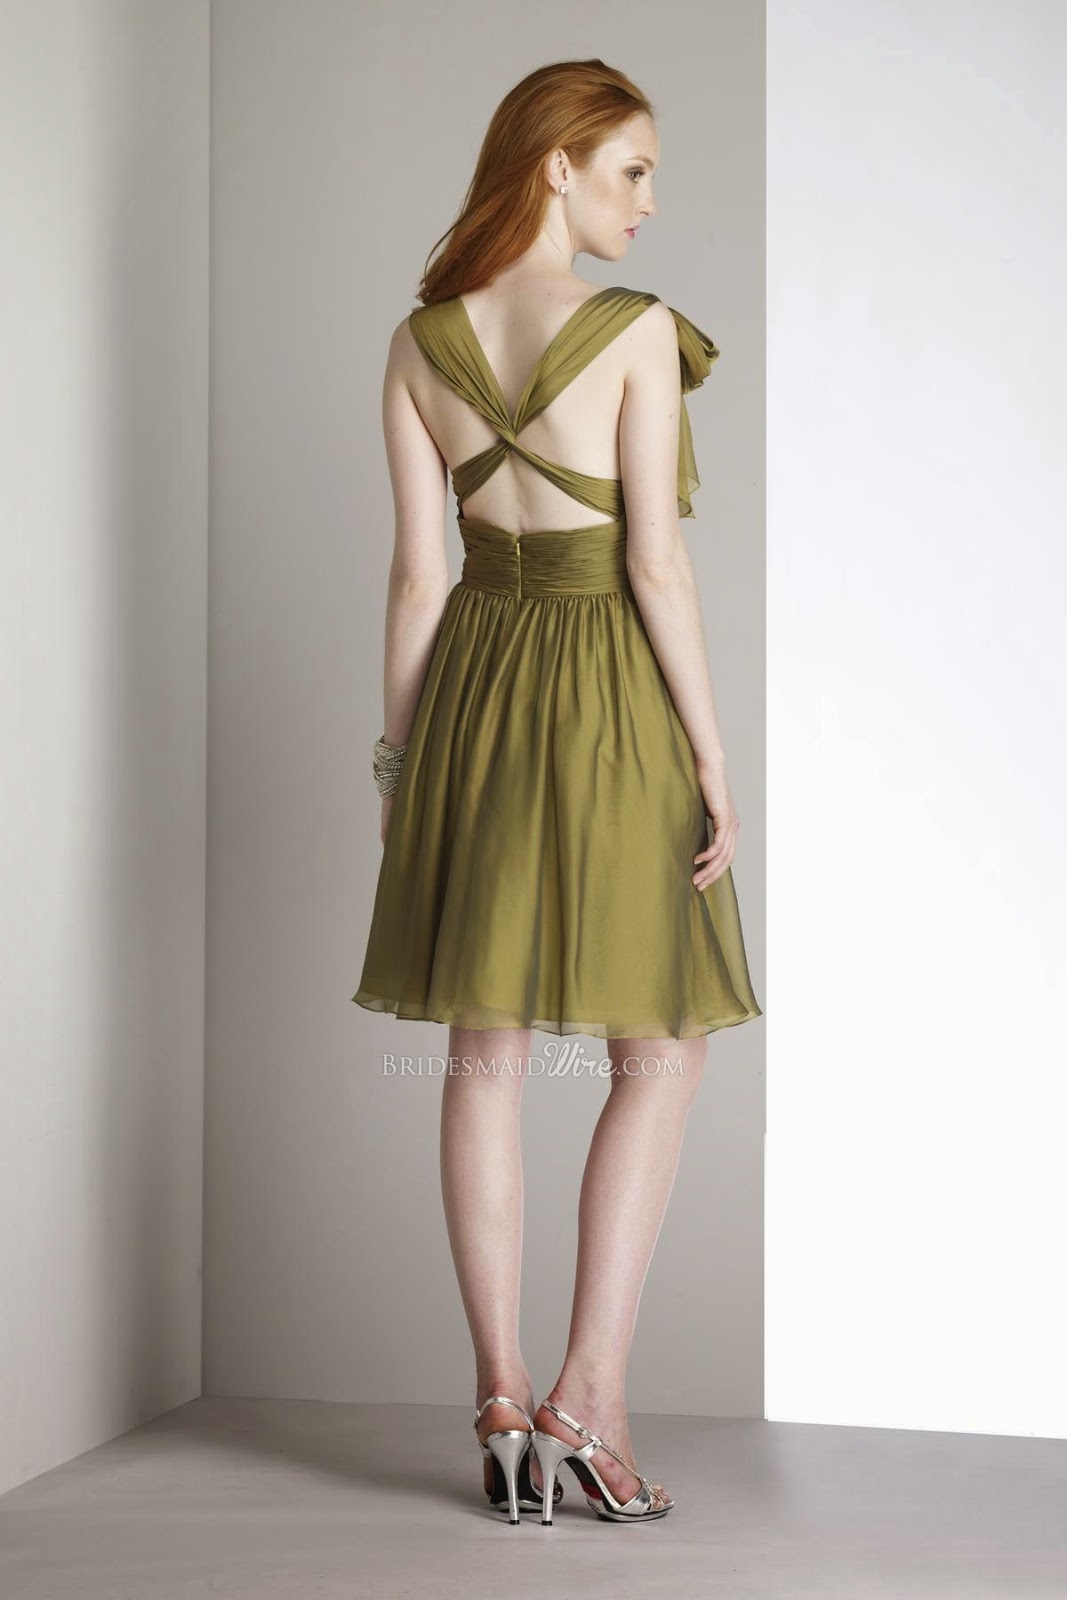 Shirred V-neck Olive Cocktail Bridesmaid Dress with Jeweled Centered Bow-2